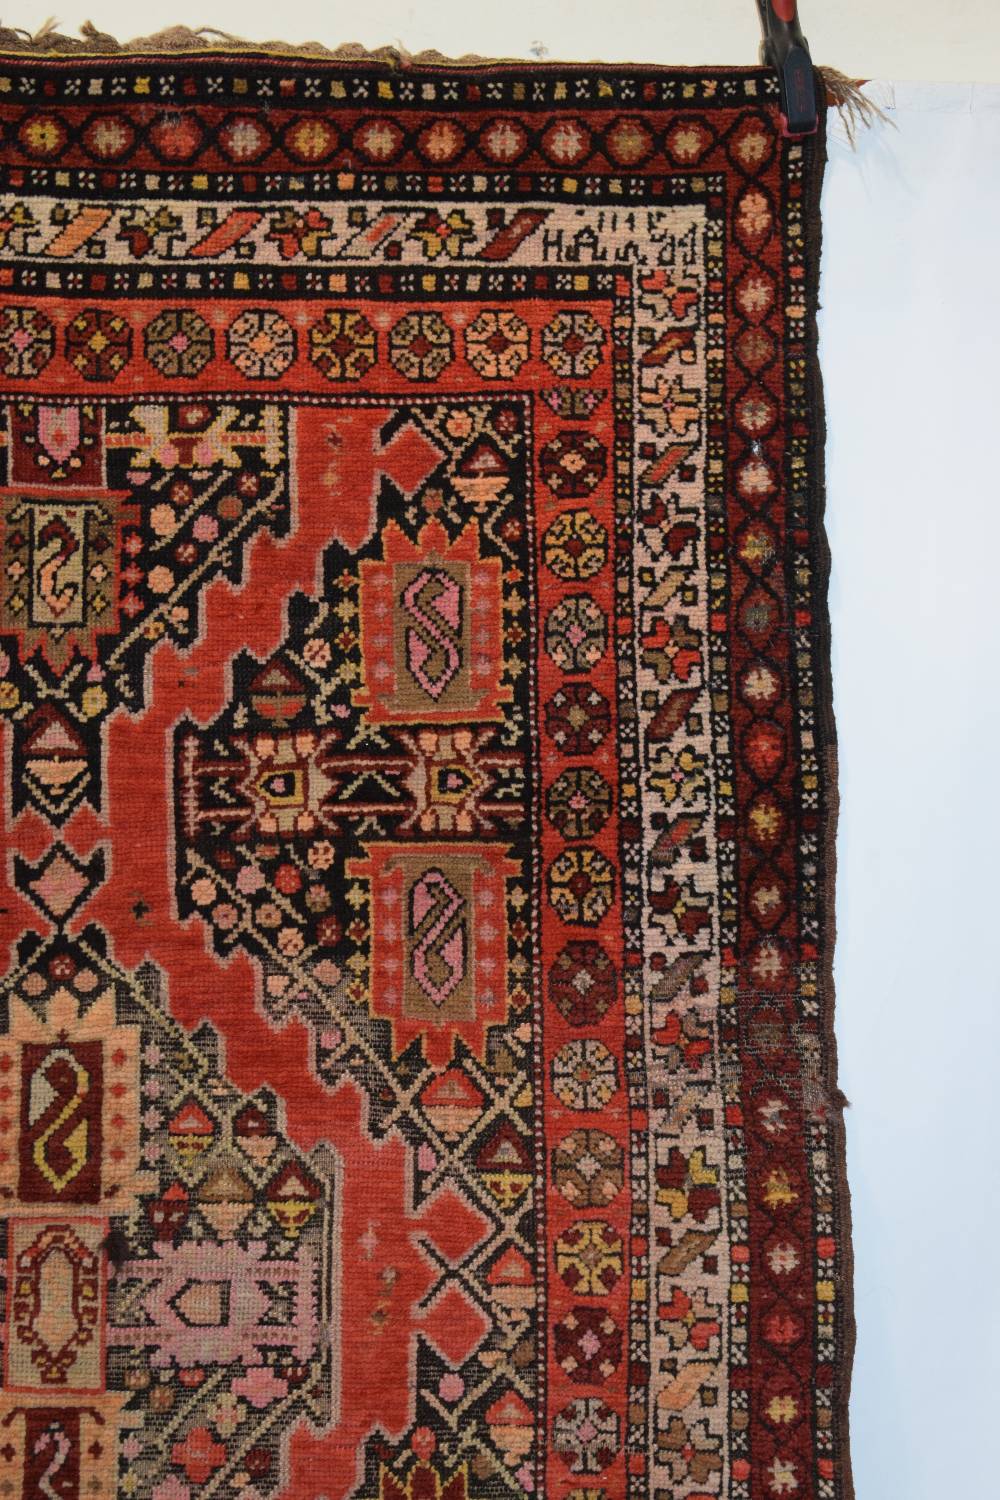 Karabakh rug, south west Caucasus, circa 1930s-40s, 10ft. 6in. X 4ft. 4in. 3.20m. X 1.32m. Date 1949 - Image 6 of 13